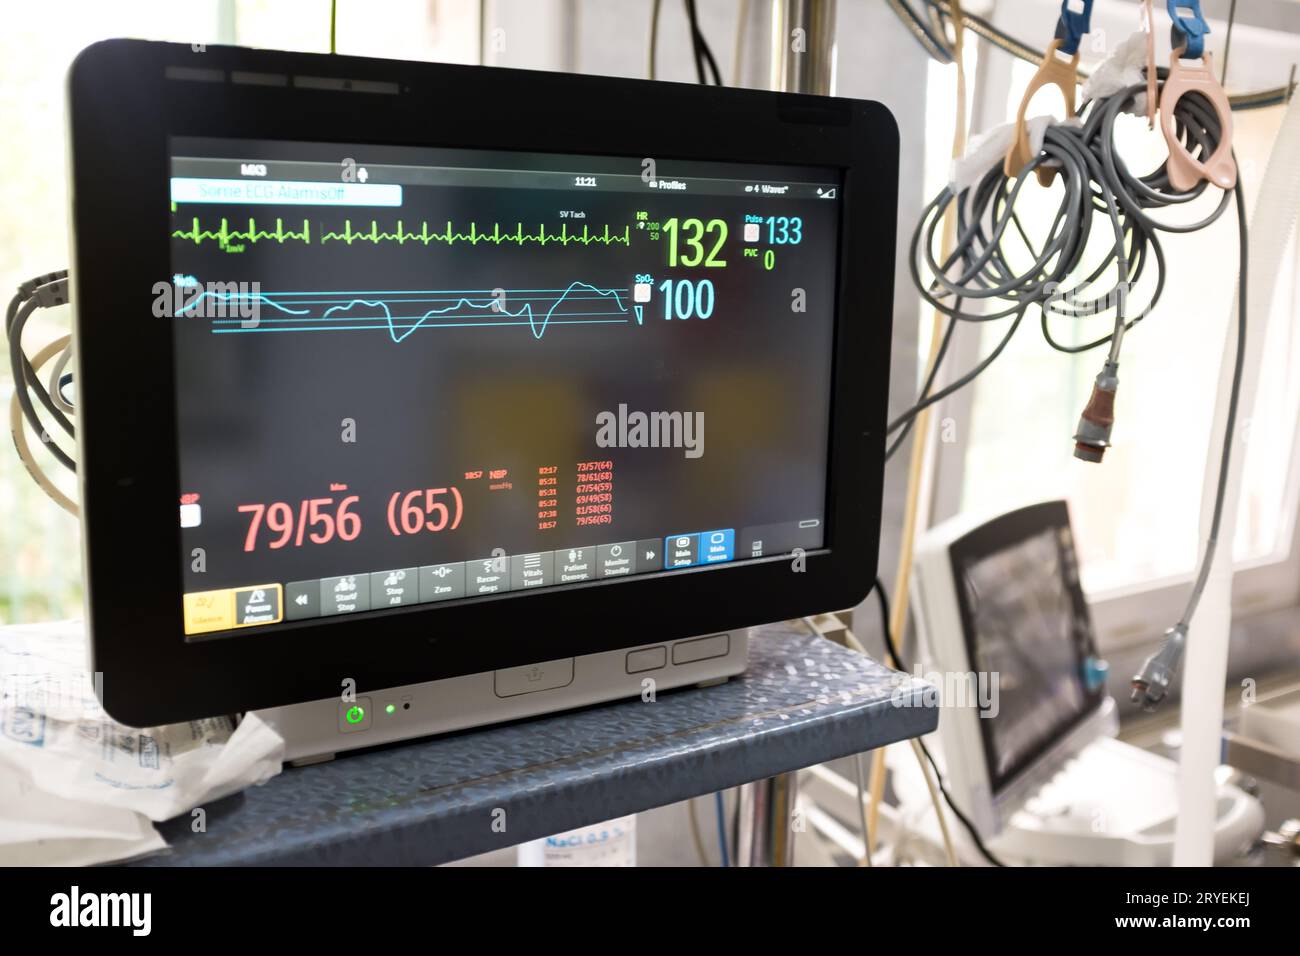 Electrocardiograph unit monitor in hospital emergency room Stock Photo